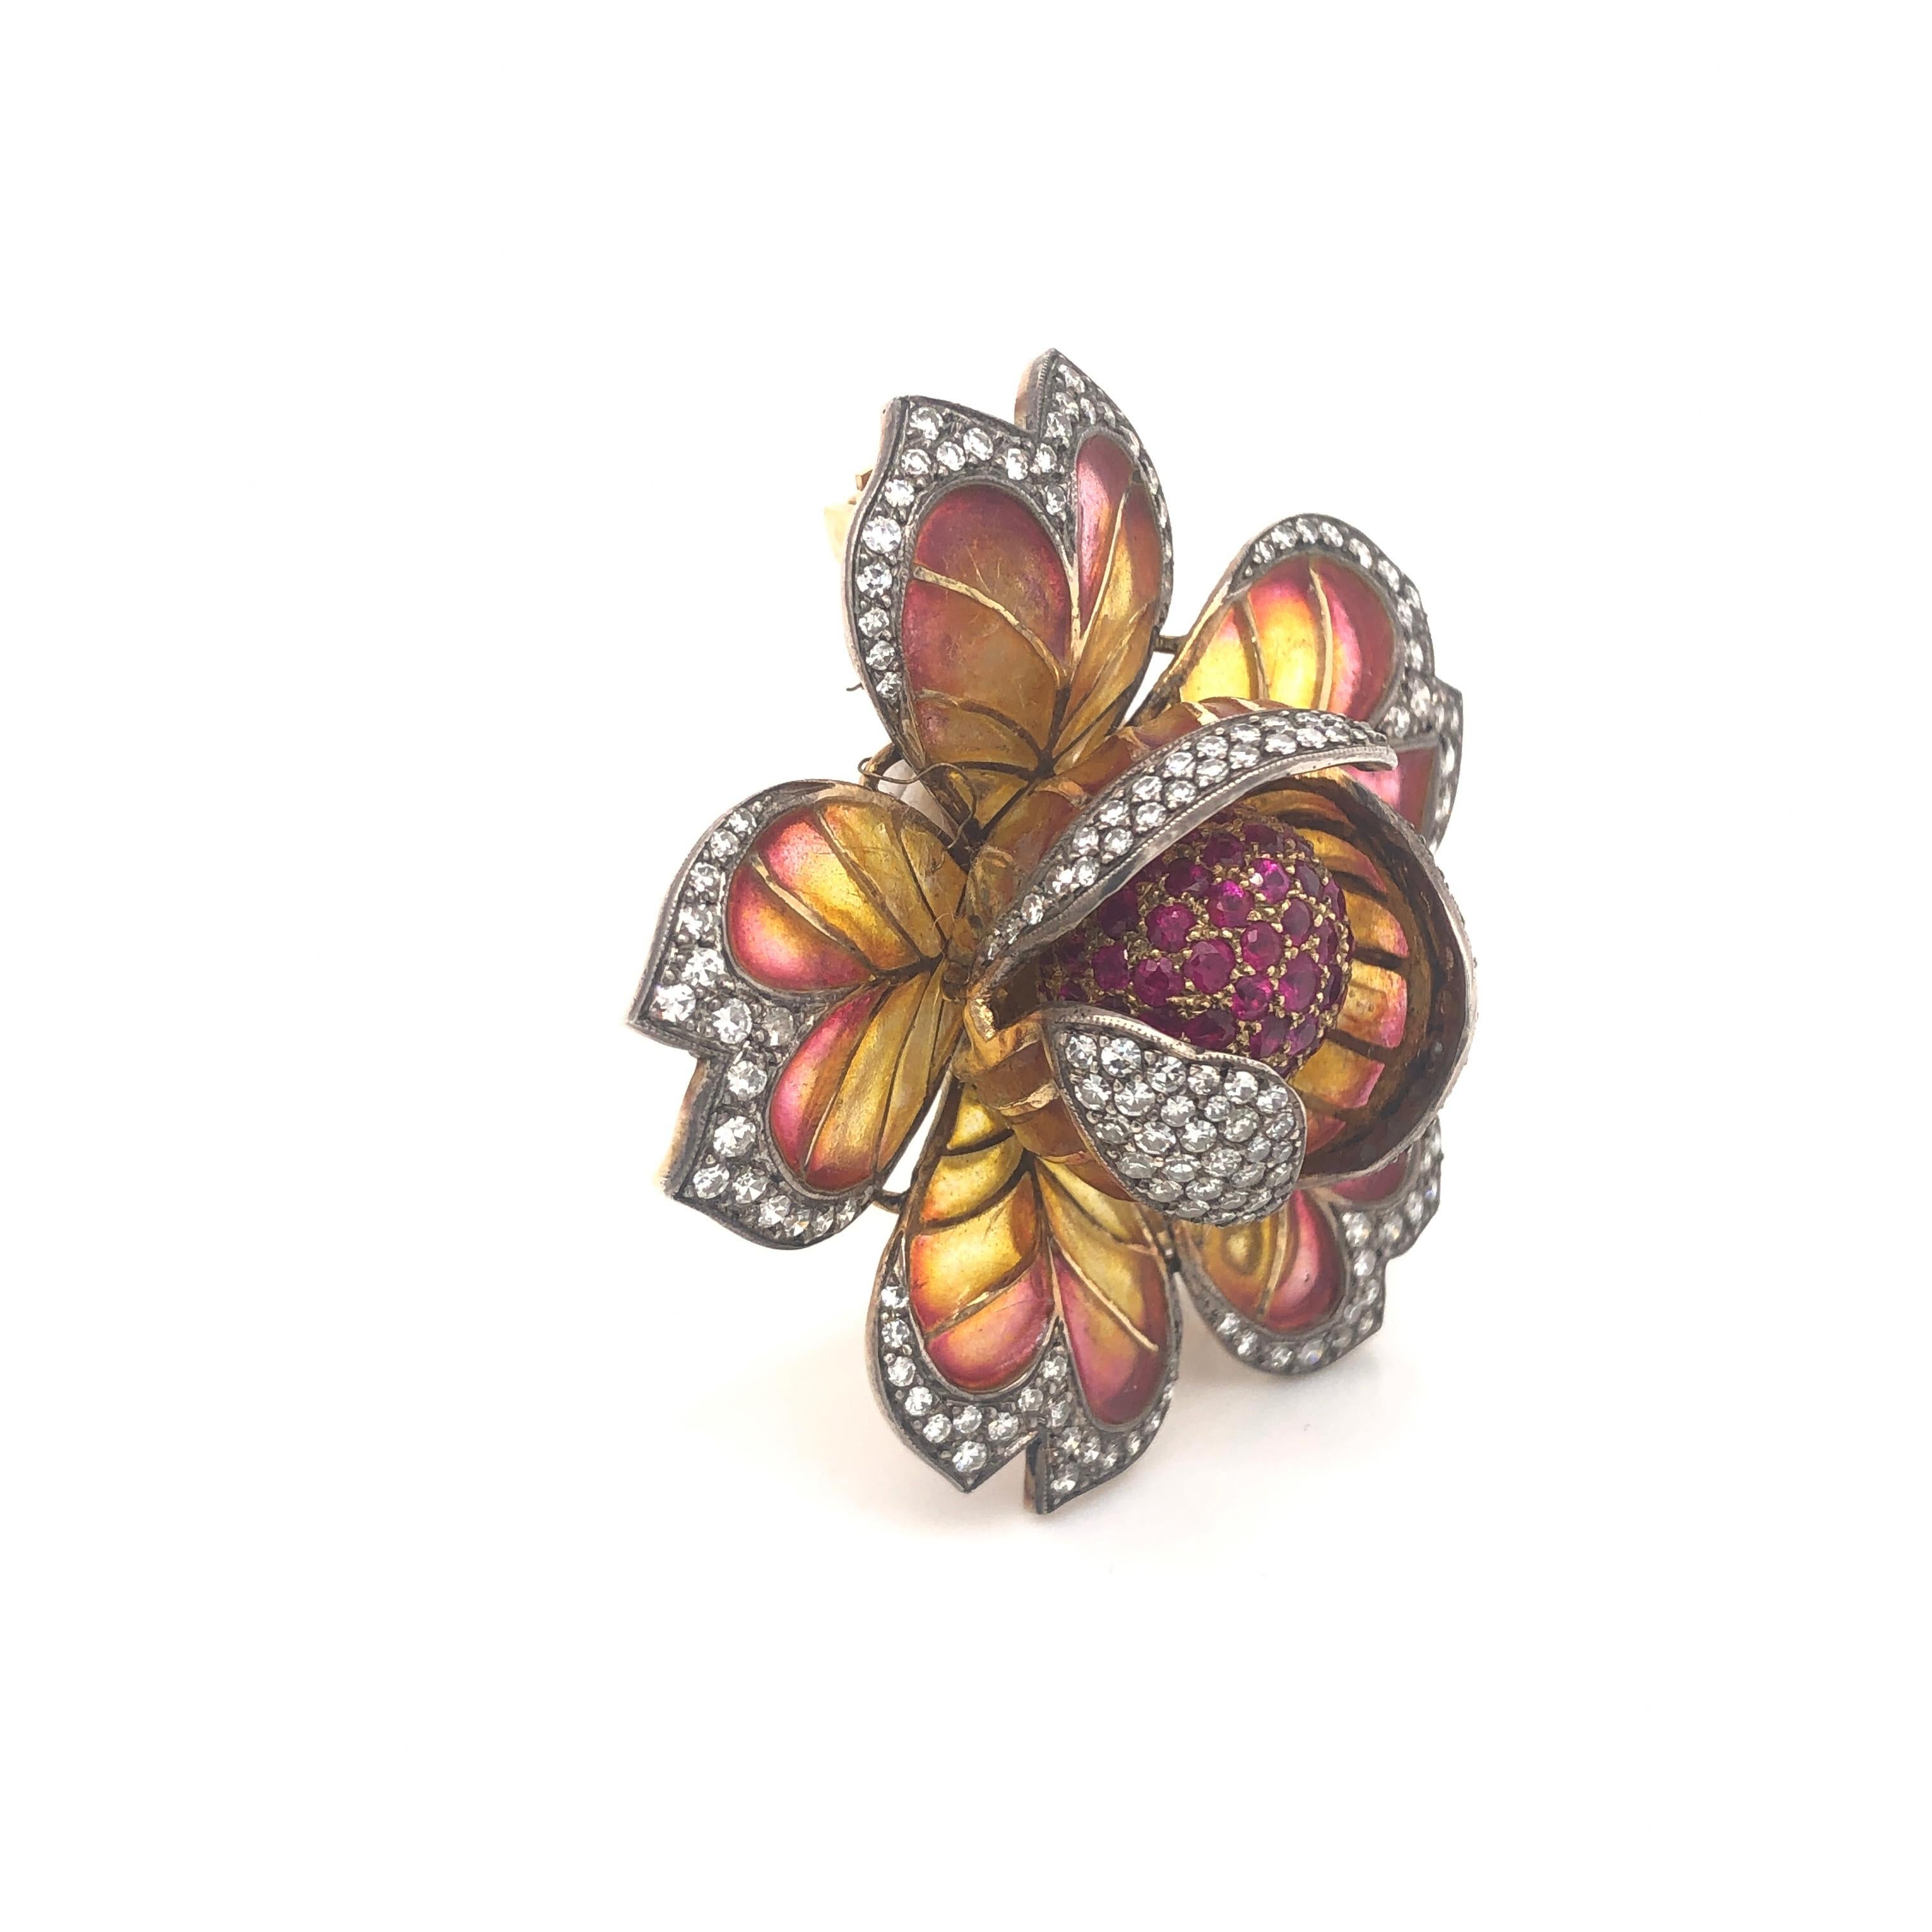 A Moira design orange to yellow plique-a-jour enamel flower brooch, with a pavé set ruby centre, and diamonds set to the outer petal edges, with a millegrain edge. Mounted in gold, with a pin and roller catch fitting. Signed Moira and numbered 5239.